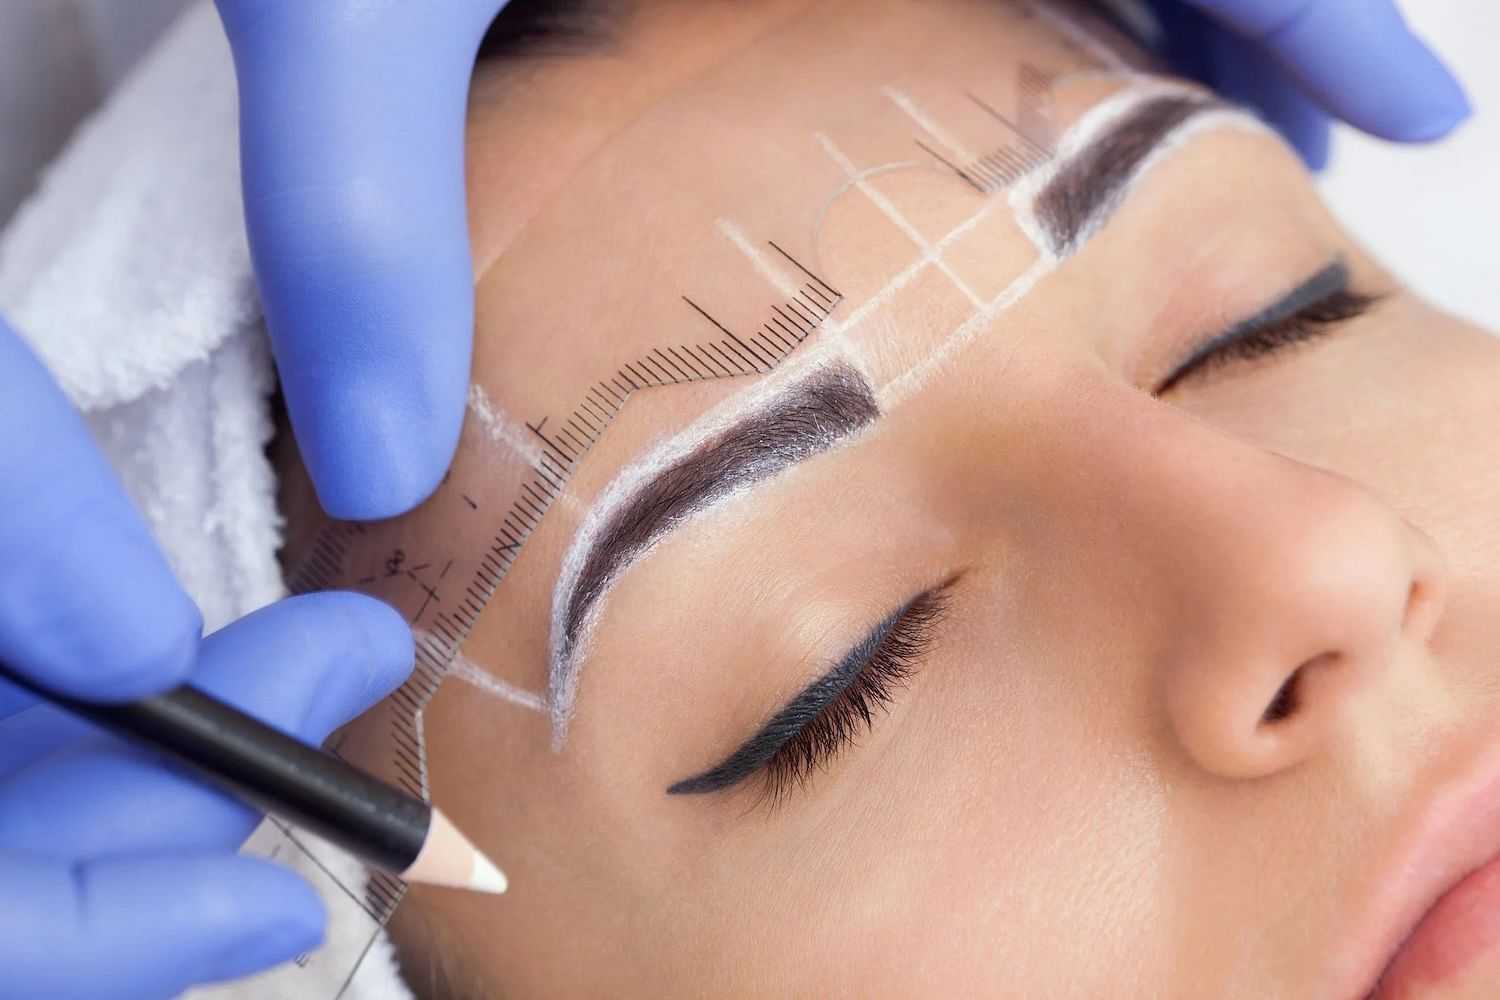 Person undergoing eyebrow marking for microblading treatment.